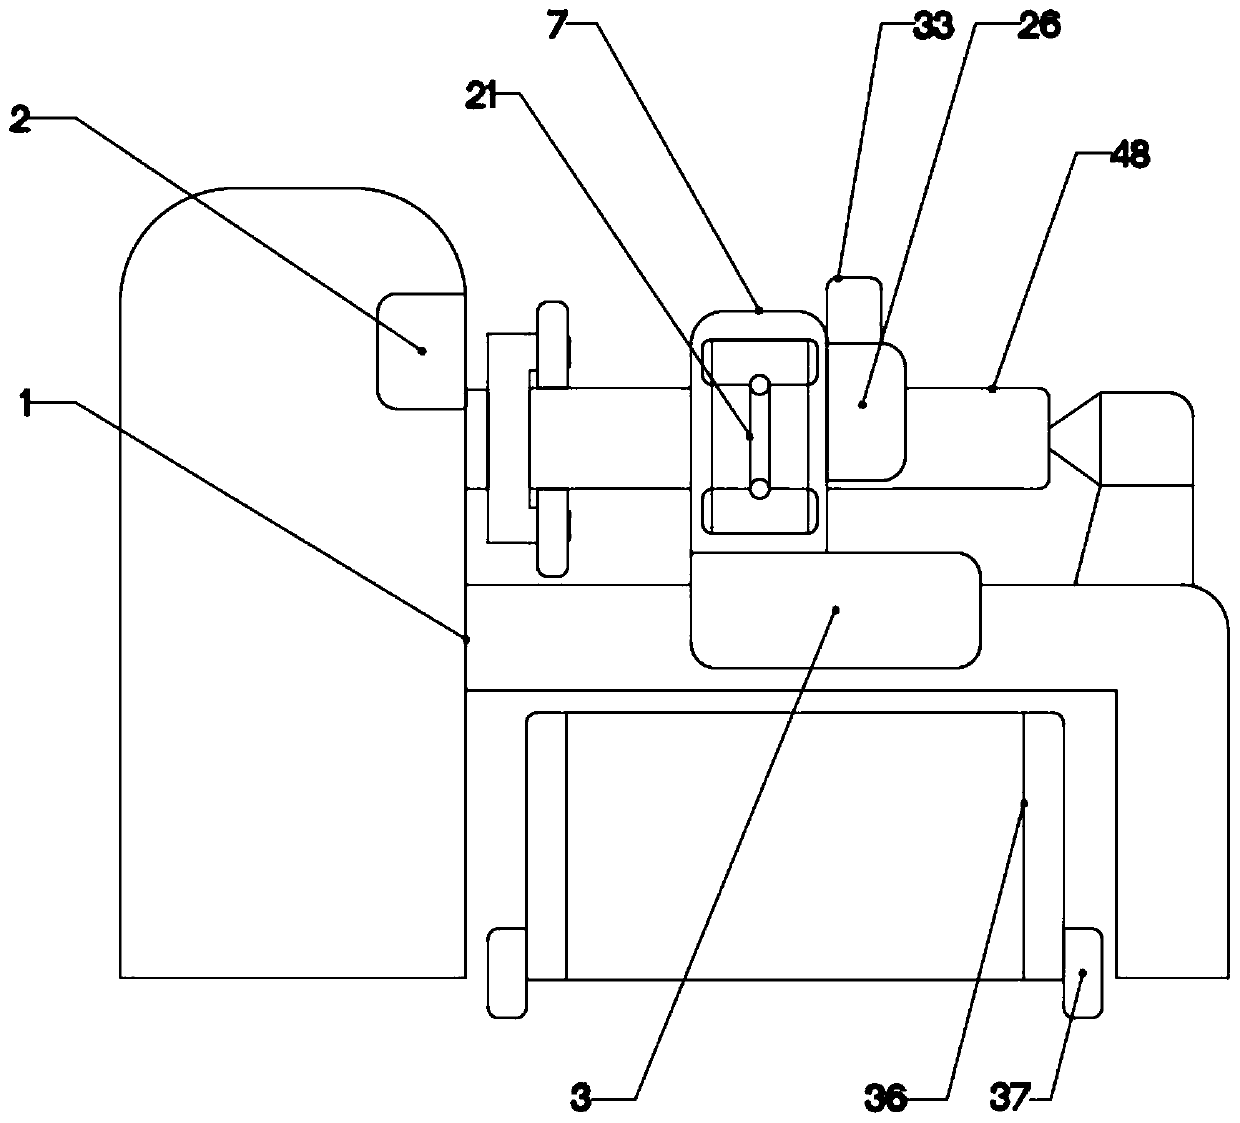 Multi-angle machining roller manufacturing device